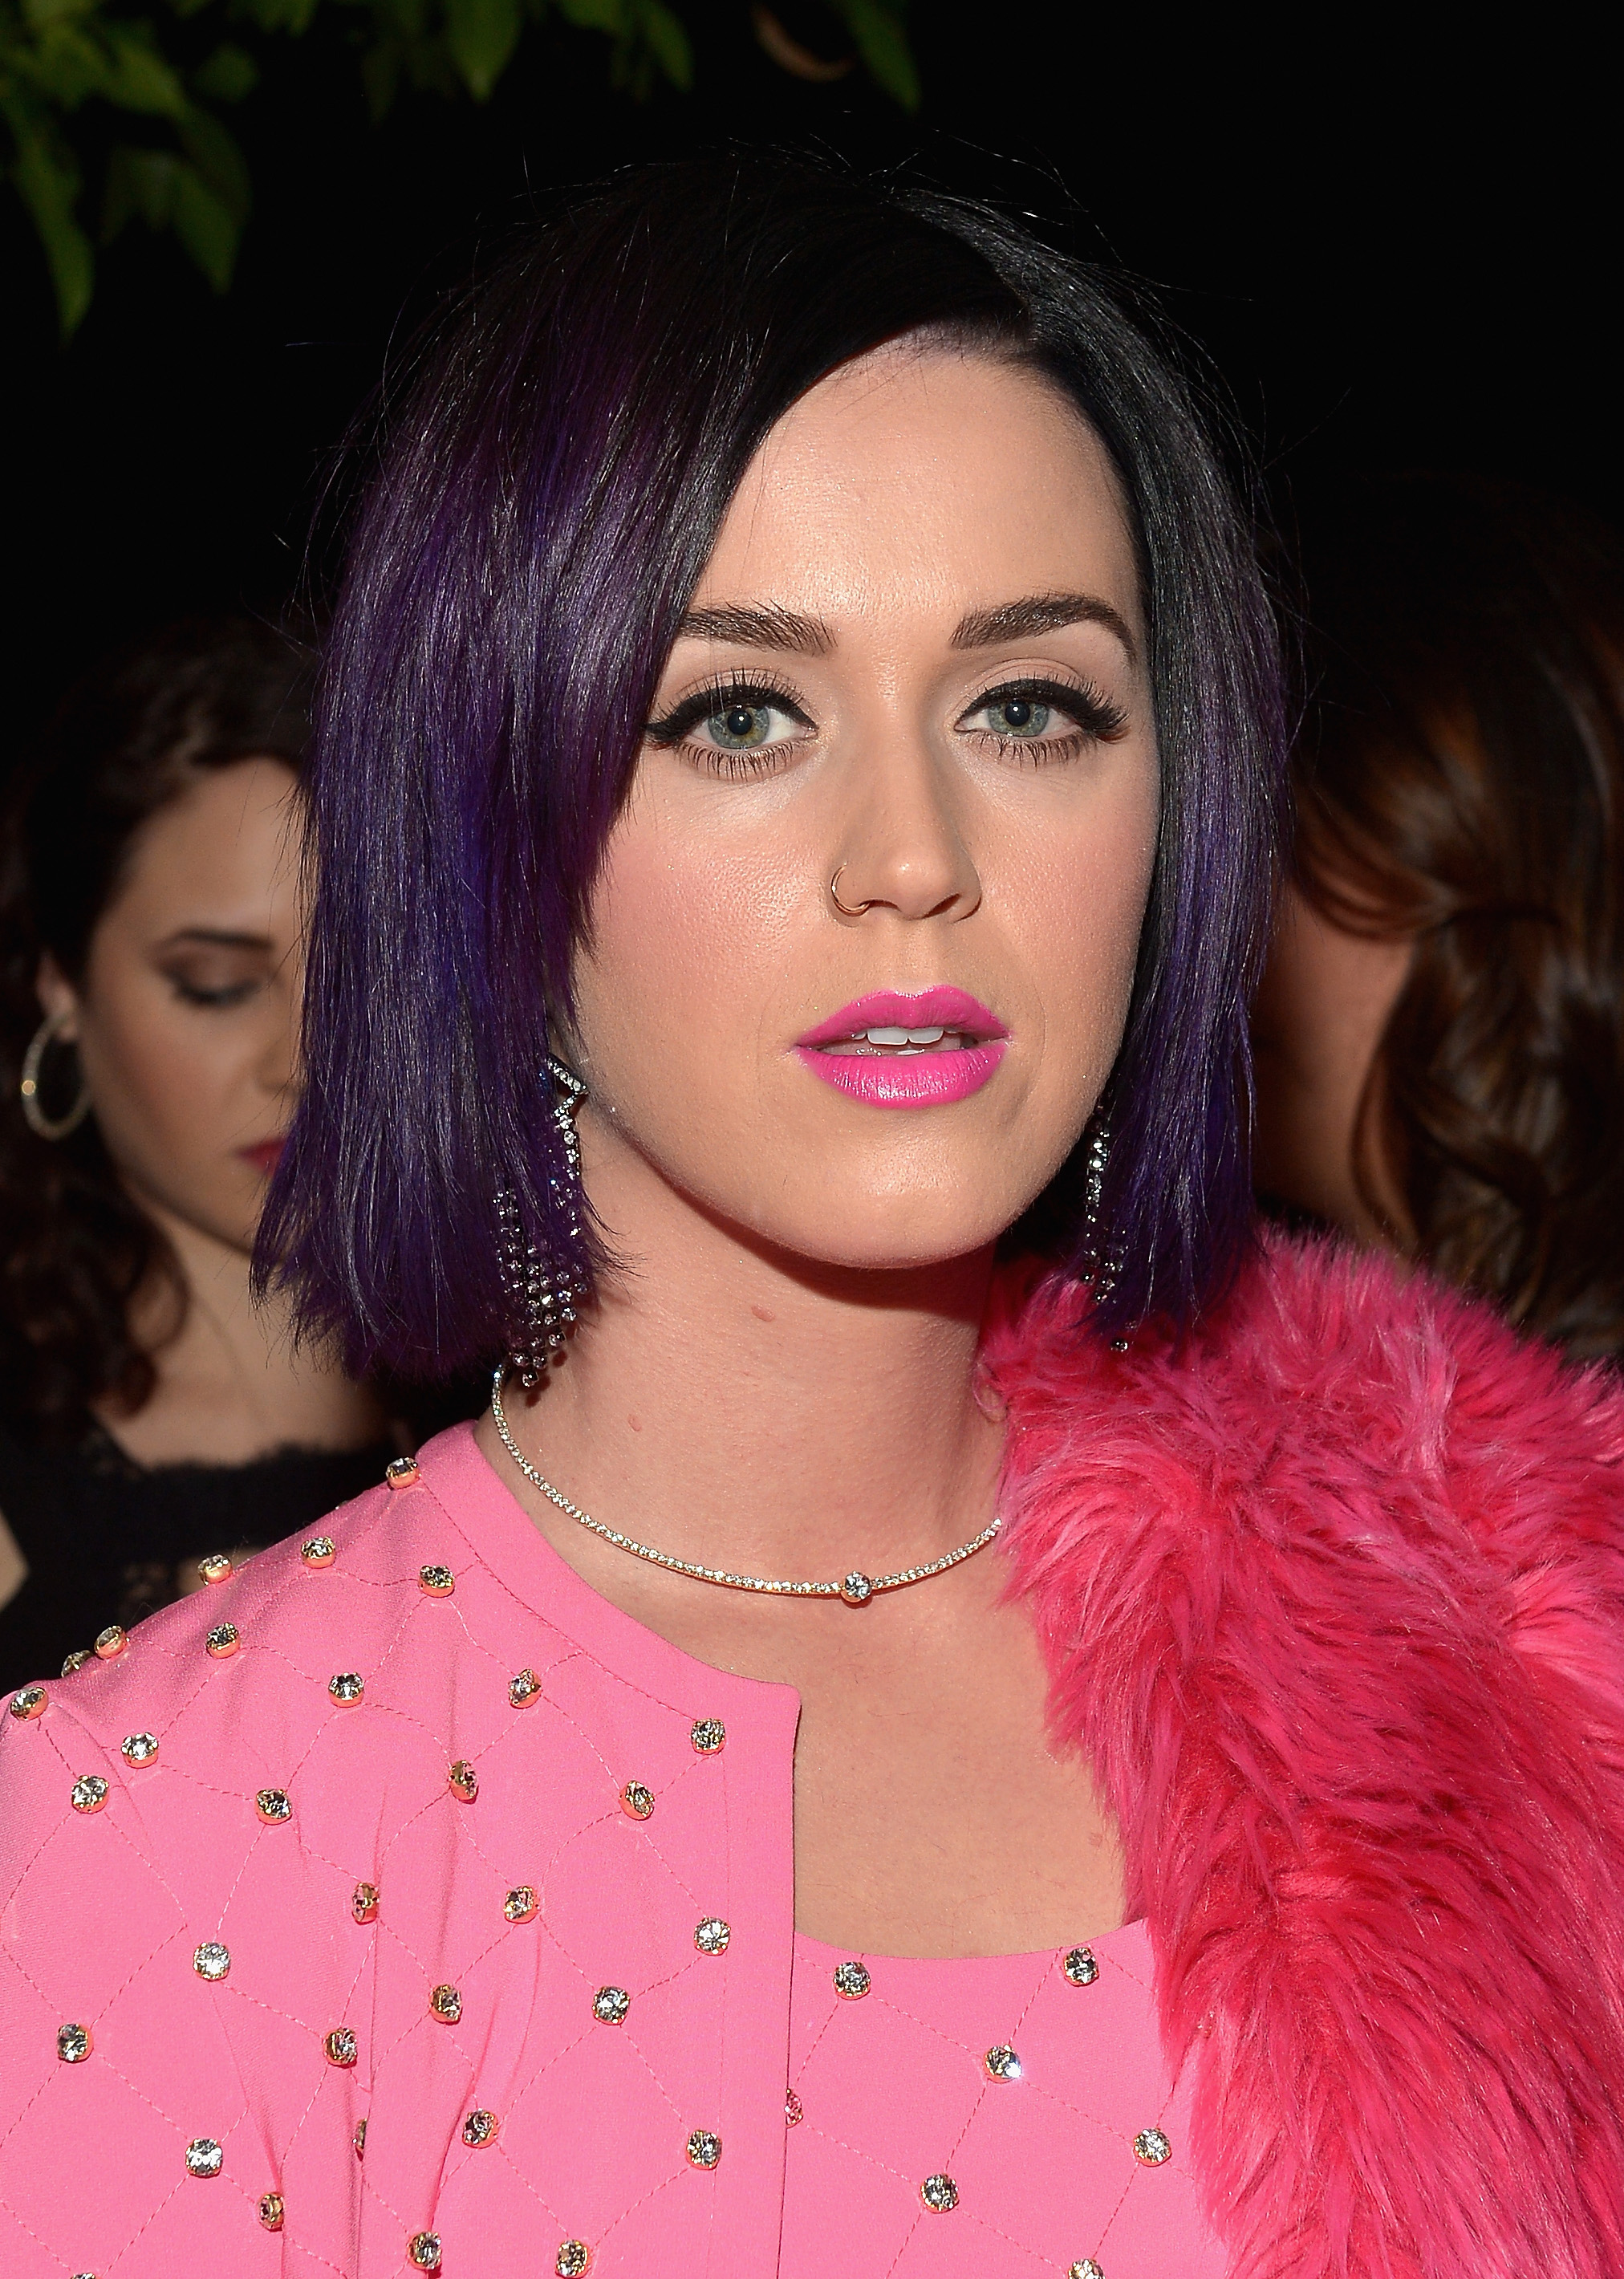 Katy Perry attends the 'Fashion Los Angeles Awards' Show on Jan. 22, 2015 in West Hollywood, California. (Charley Gallay—Getty Images/2015 Charley Gallay)